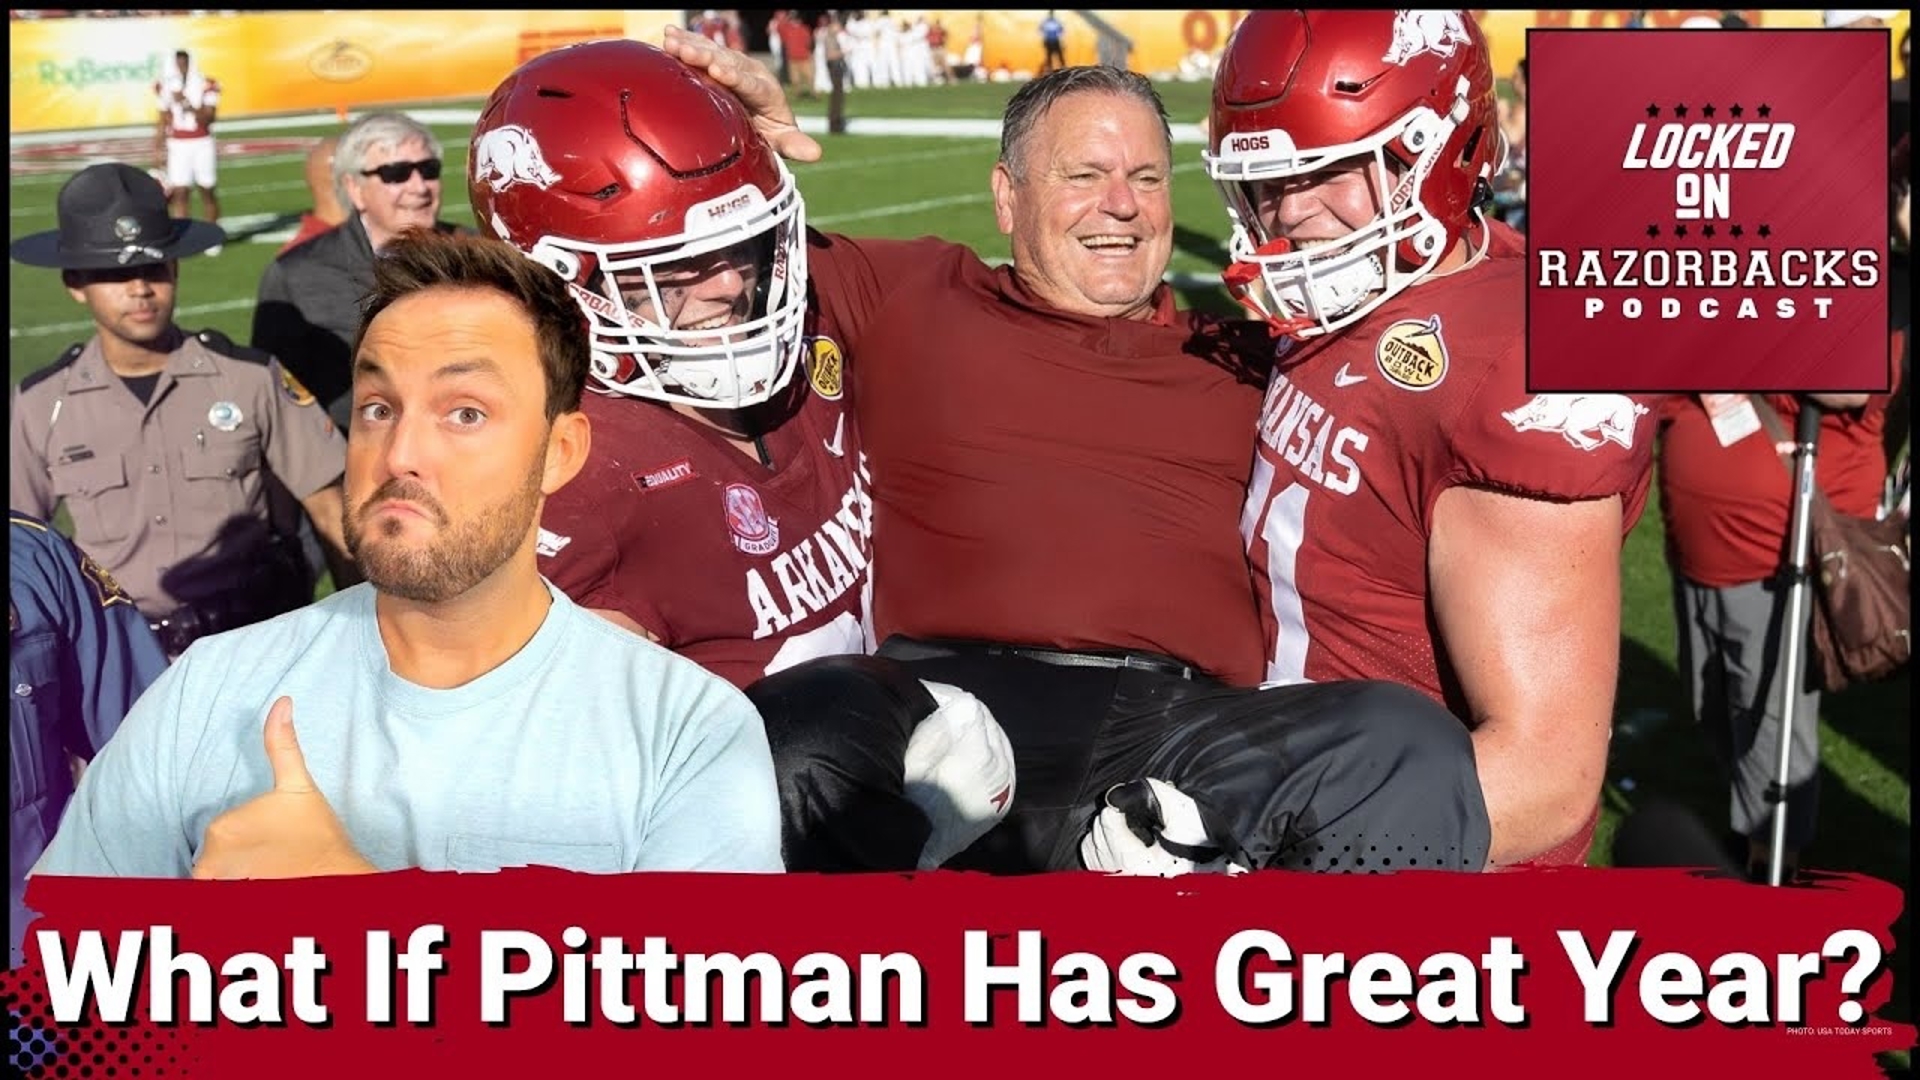 Razorback fans overall are down on the football program and Sam Pittman since last season. But what if Sam Pittman turns it around this year?